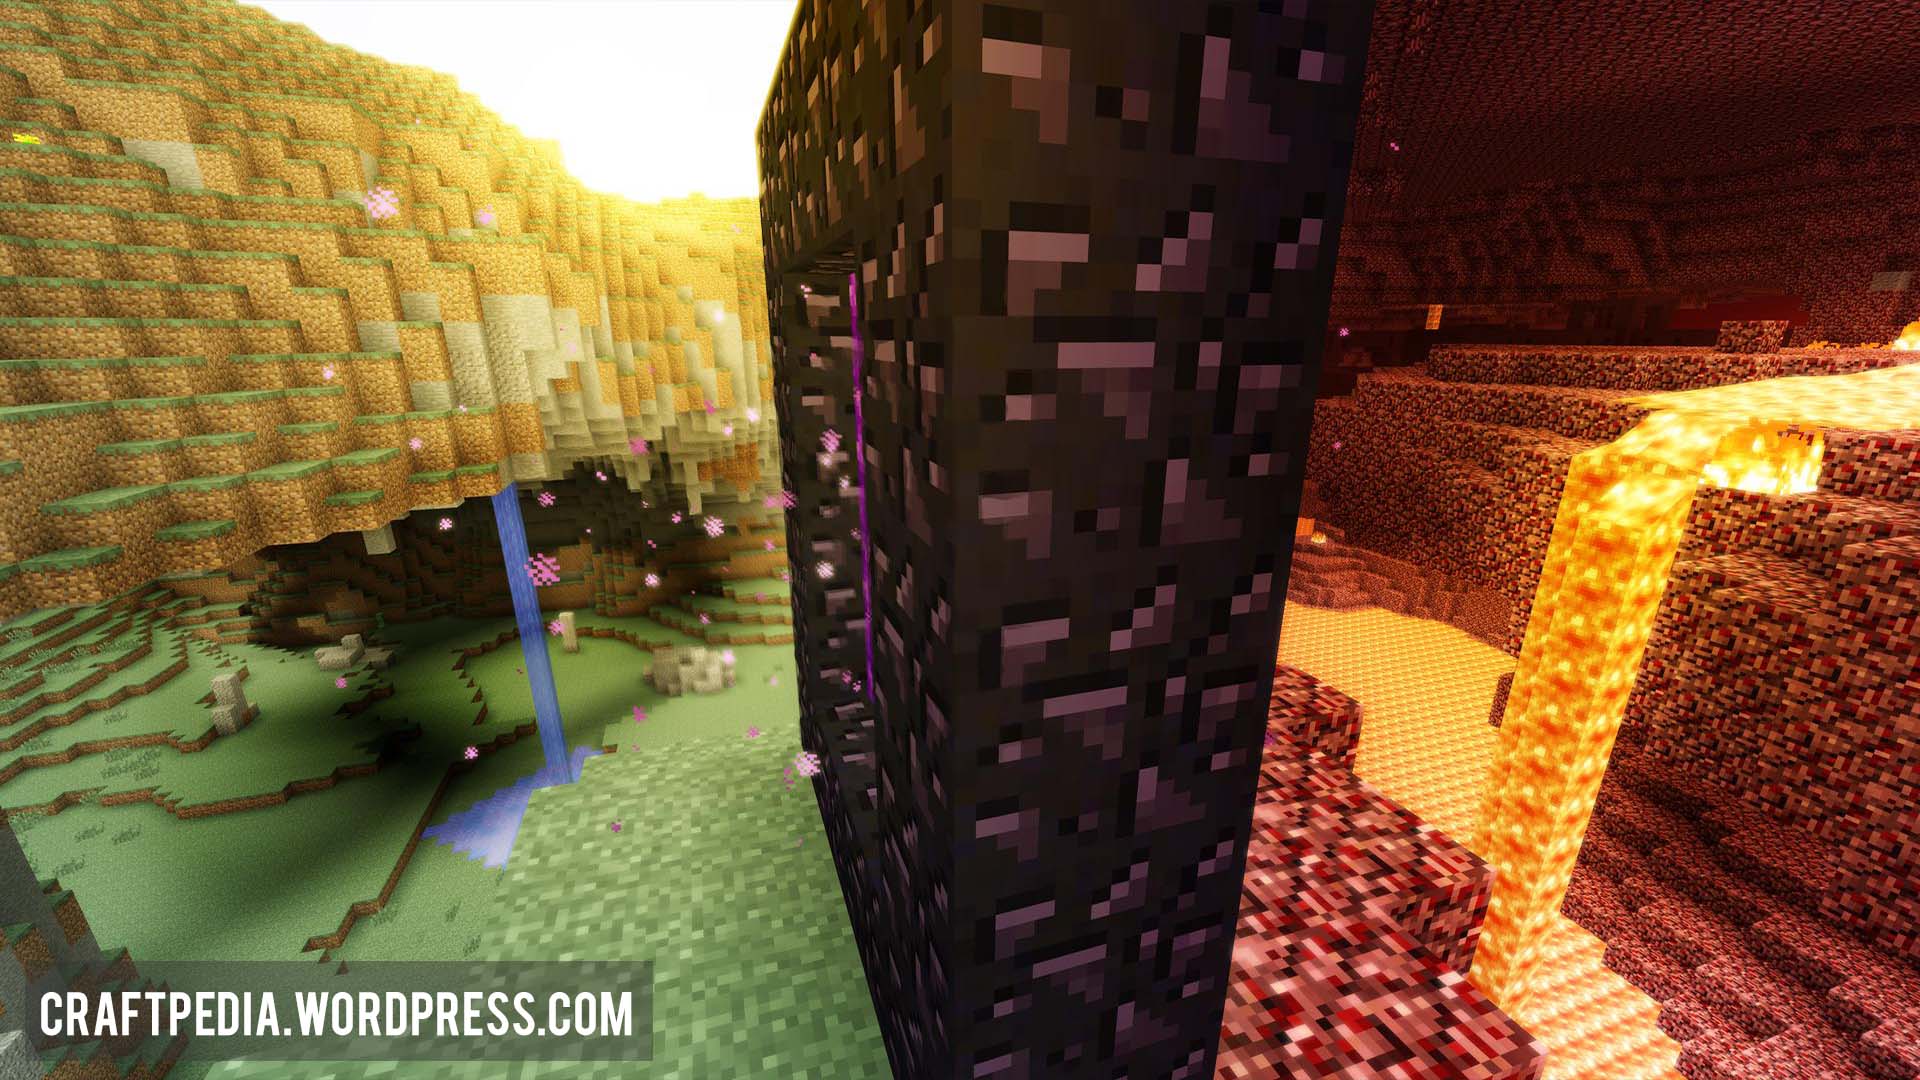 The Awesome Alternate Dimensions Minecraft Wallpaper Shows